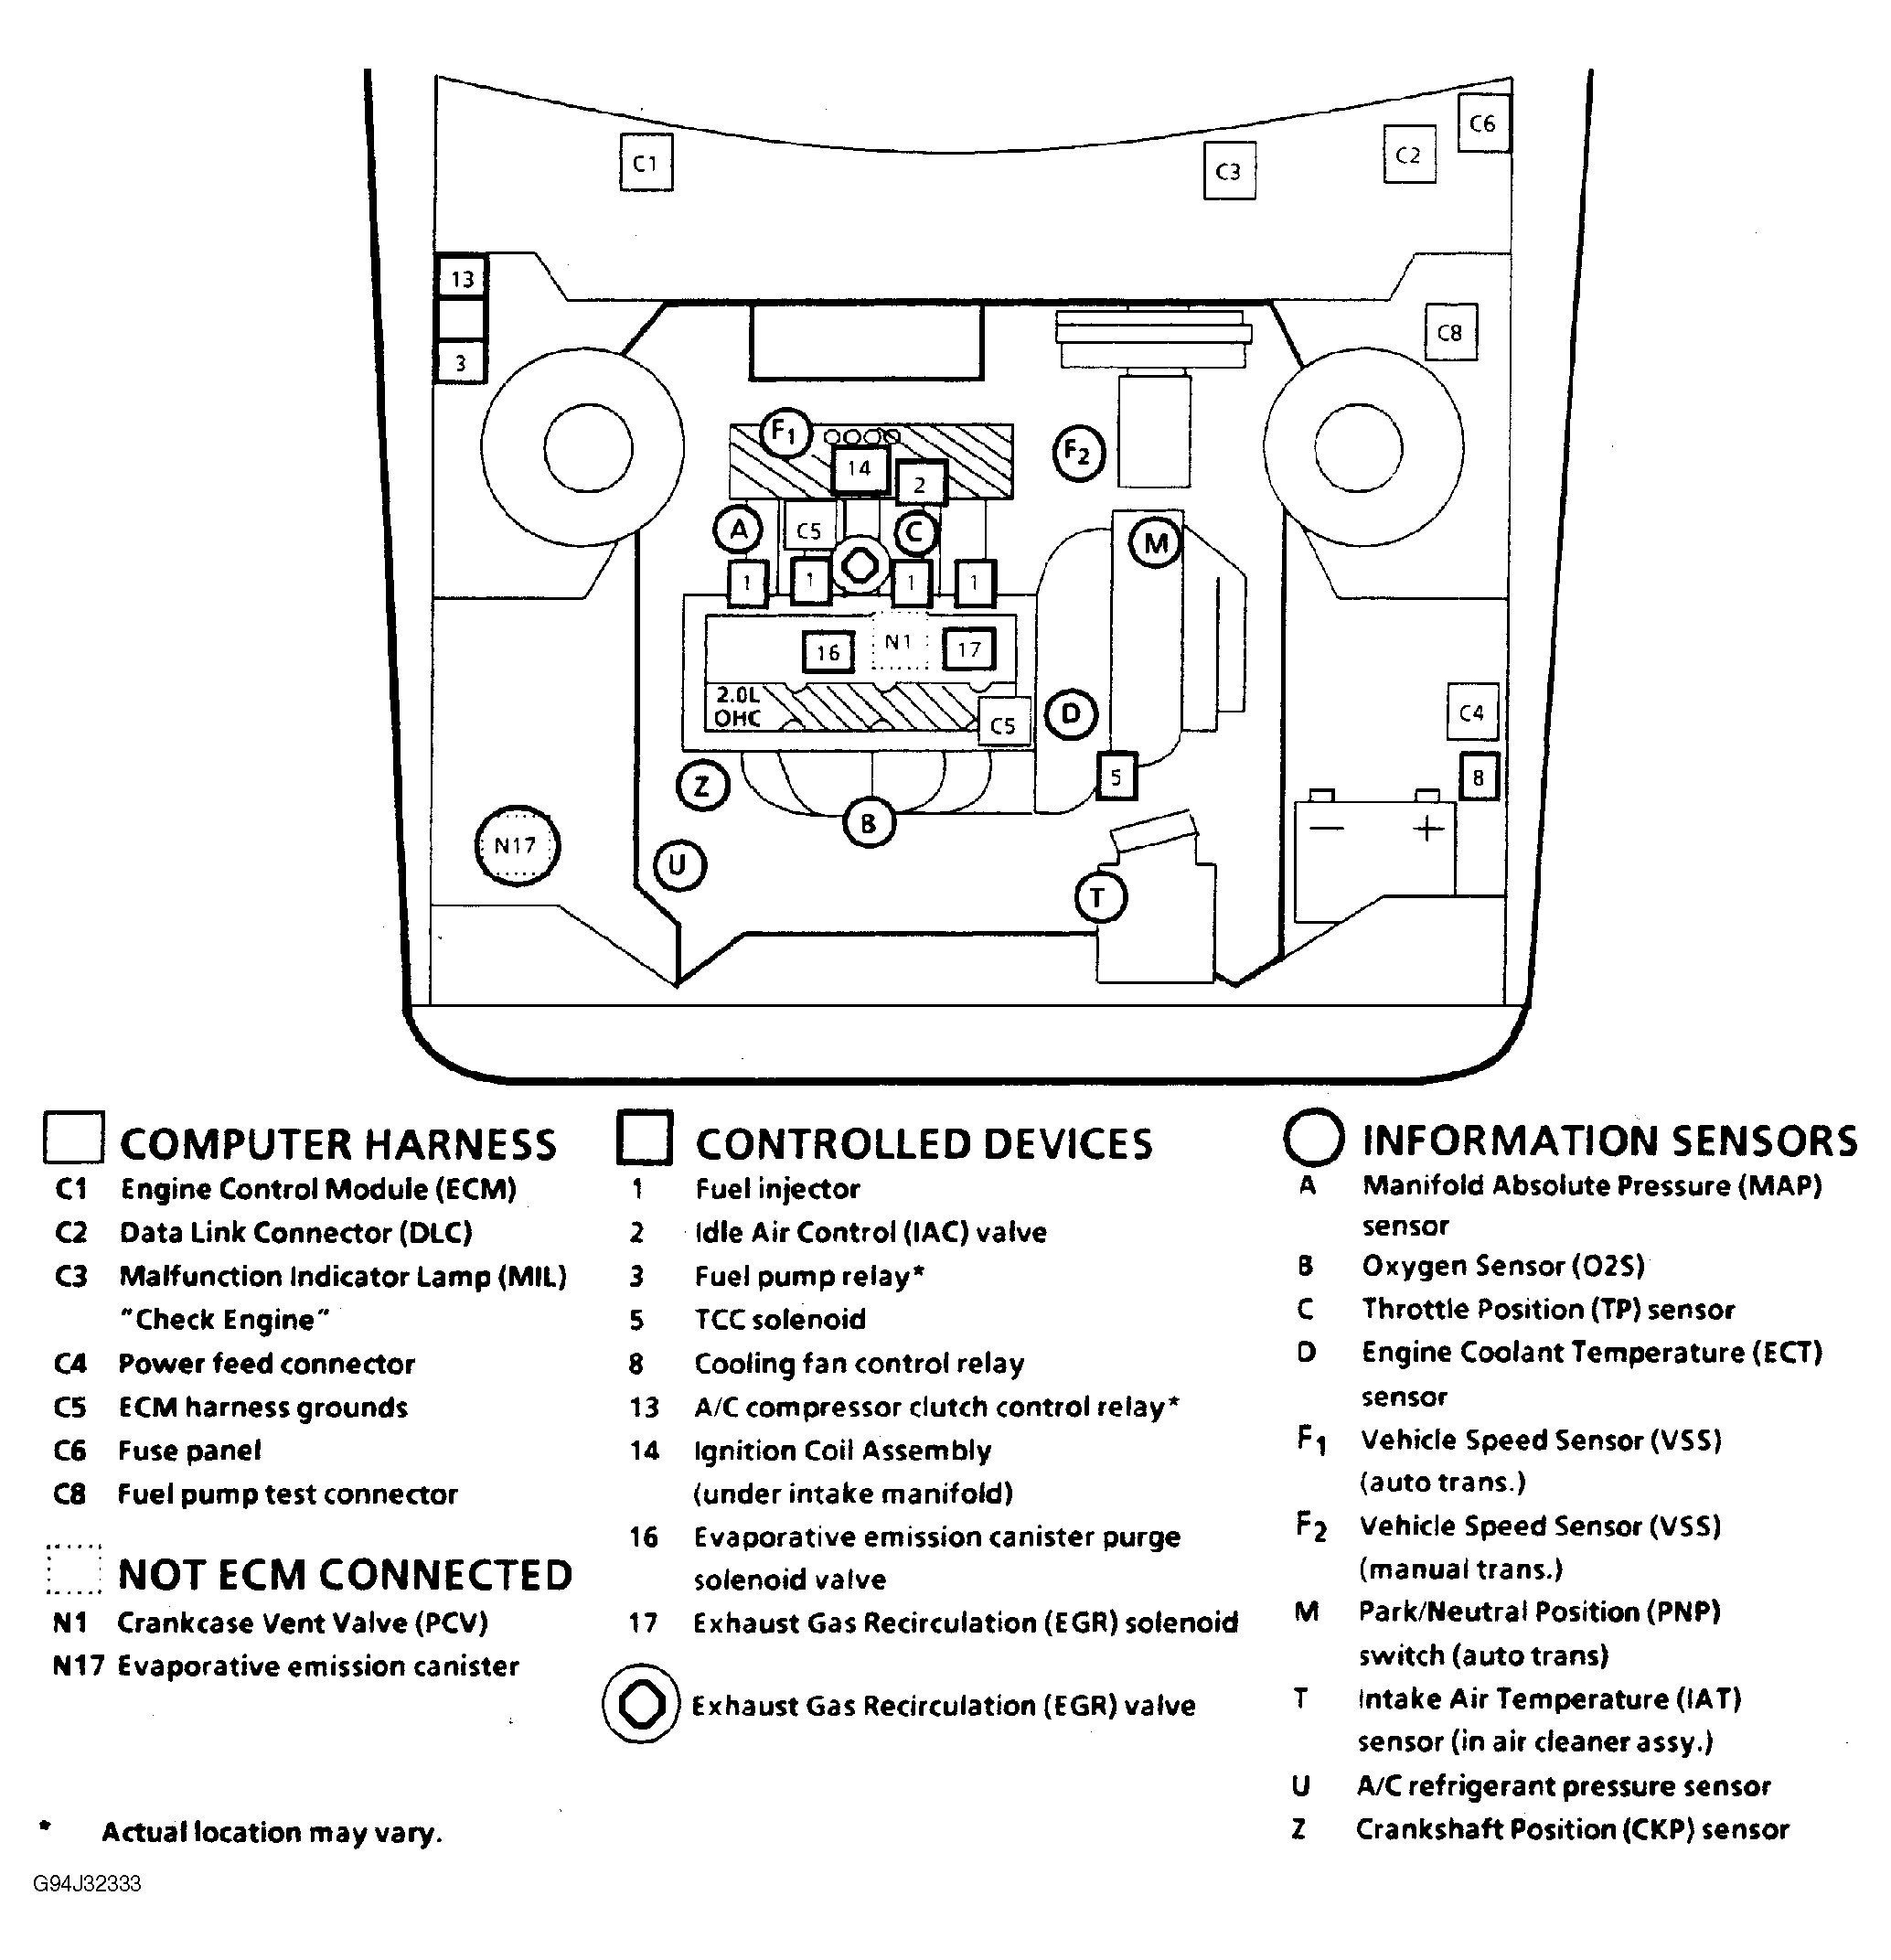 Chevrolet Cavalier 1994 - Component Locations -  Component Locations (1 Of 3)